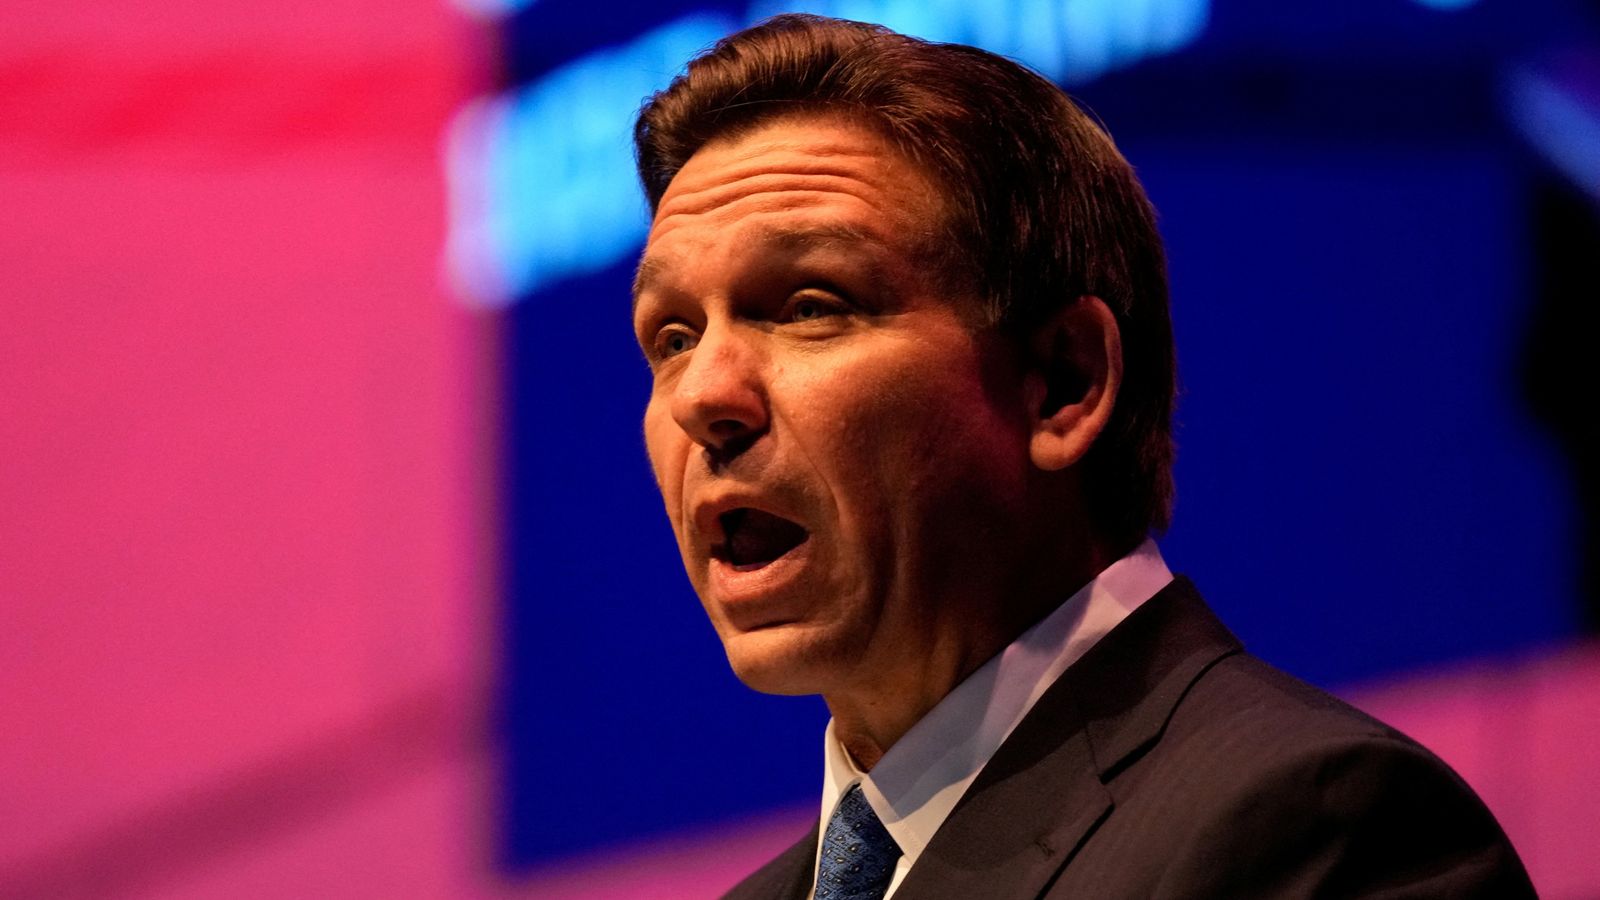 Ron DeSantis claims campaign launch 'broke the internet' - but did it hint at an incompetent candidate from the off?